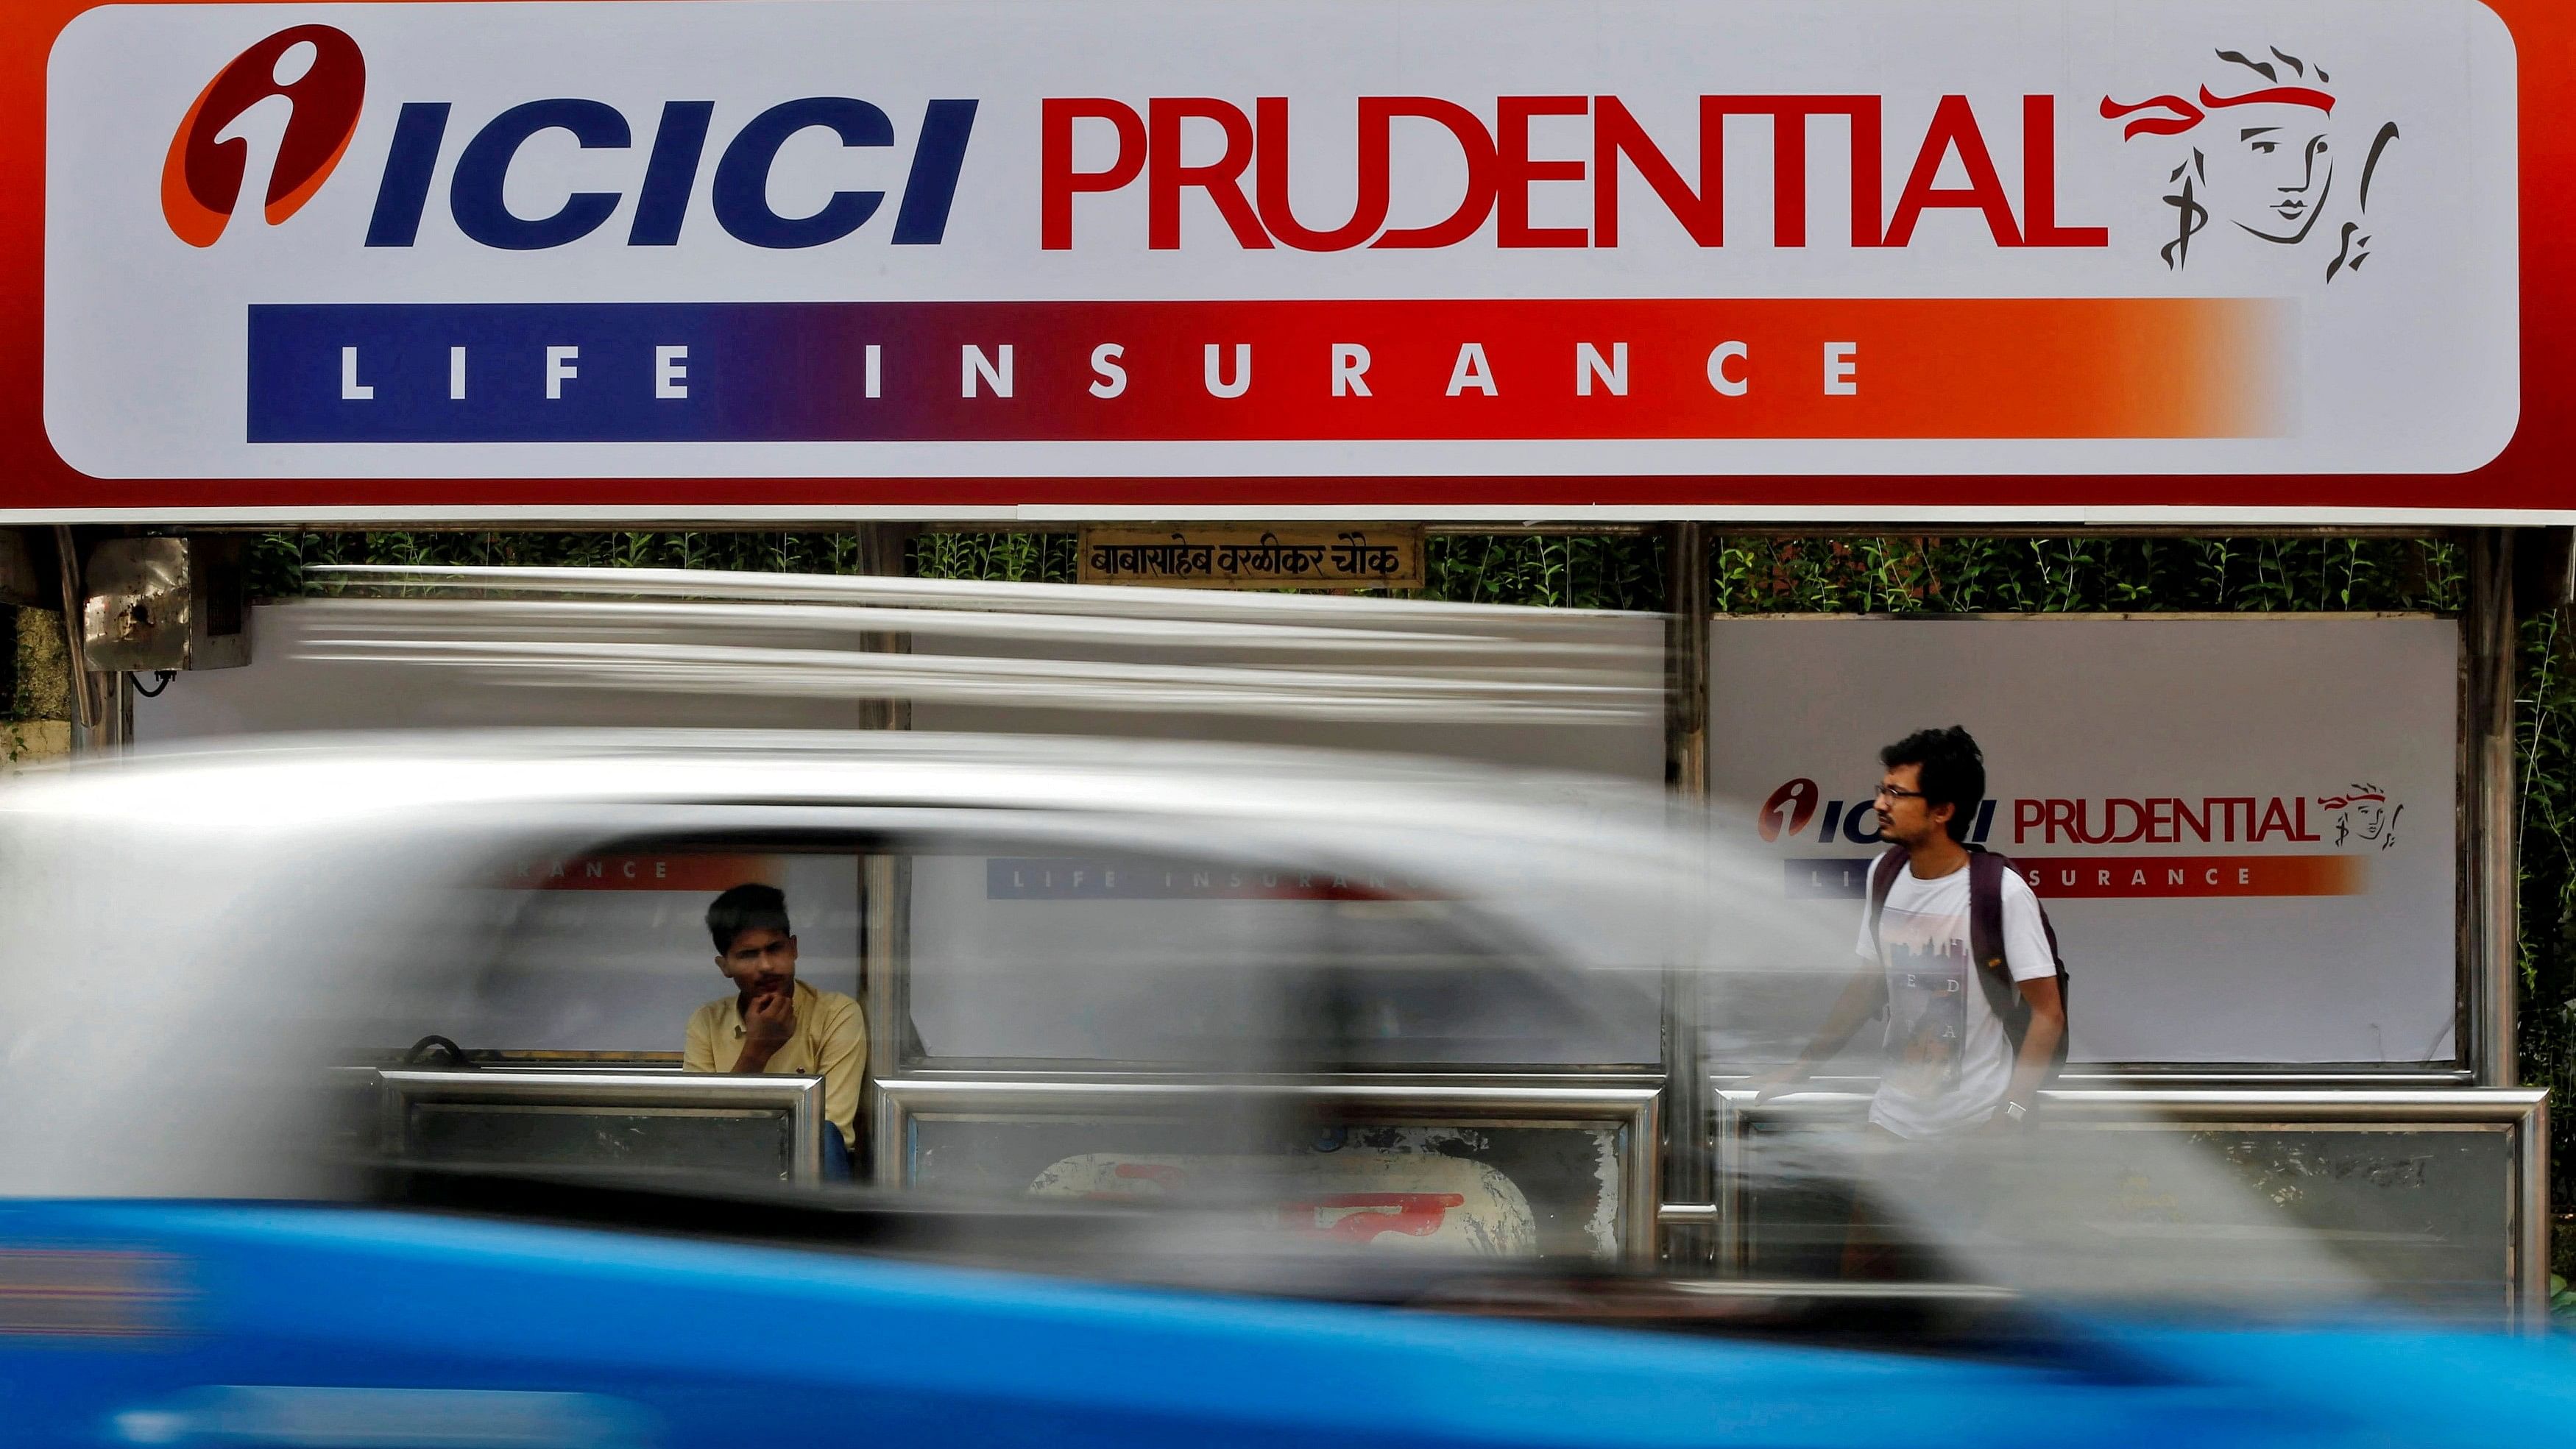 <div class="paragraphs"><p>Passengers wait in front of an ICICI Prudential billboard at a bus stop in Mumbai.</p></div>